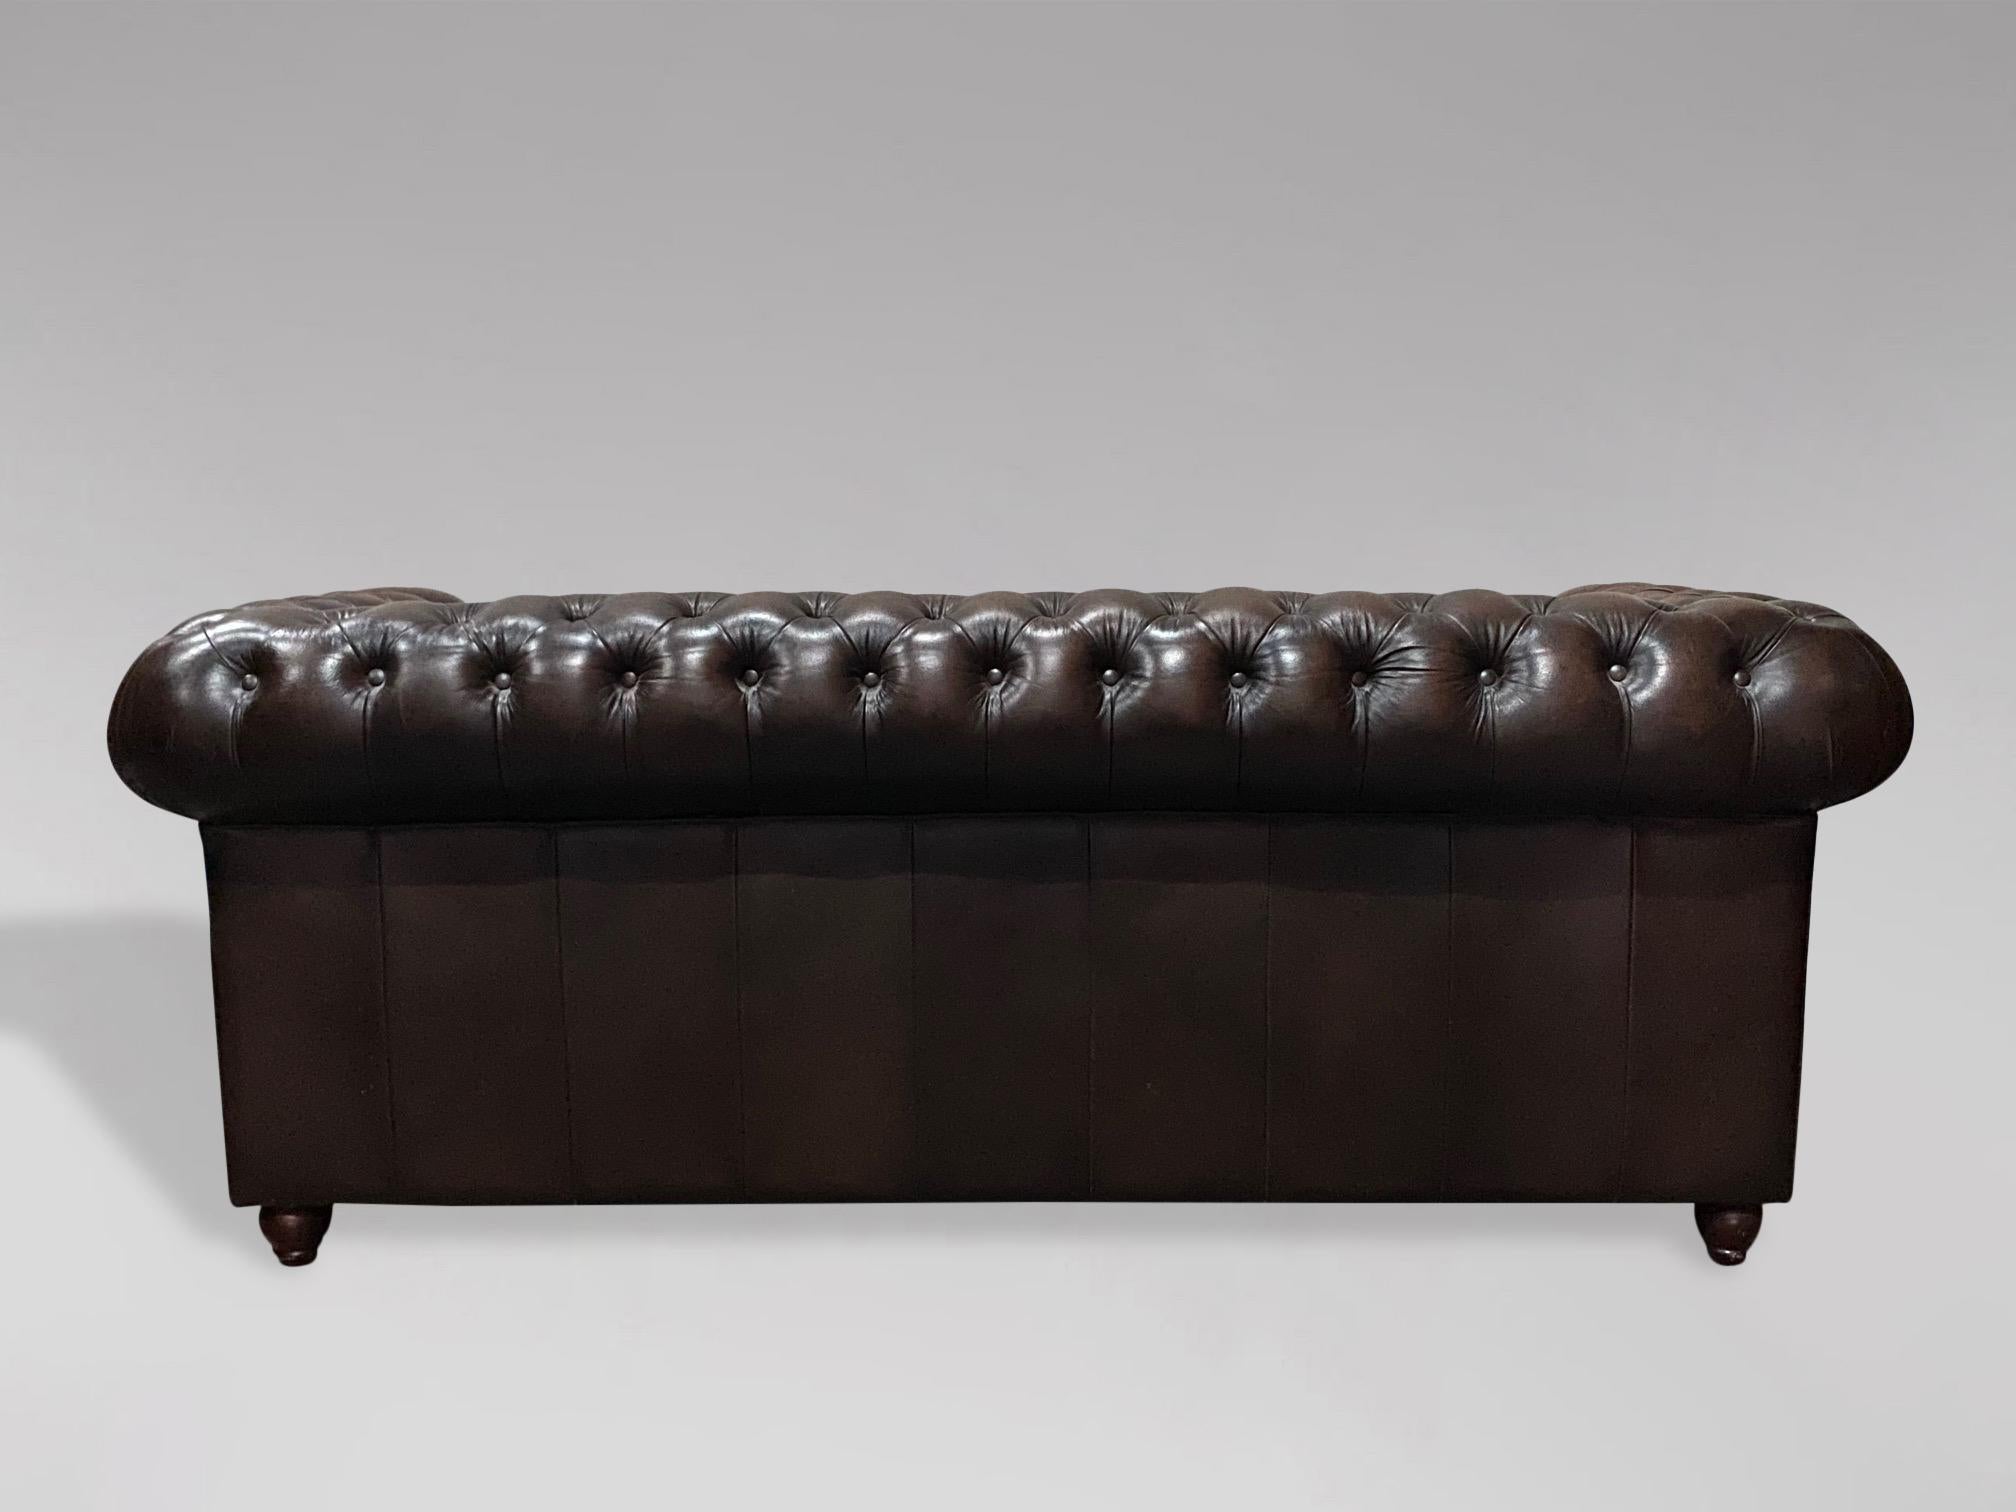 20th Century Vintage Brown Leather Three Seater Chesterfield Sofa 1